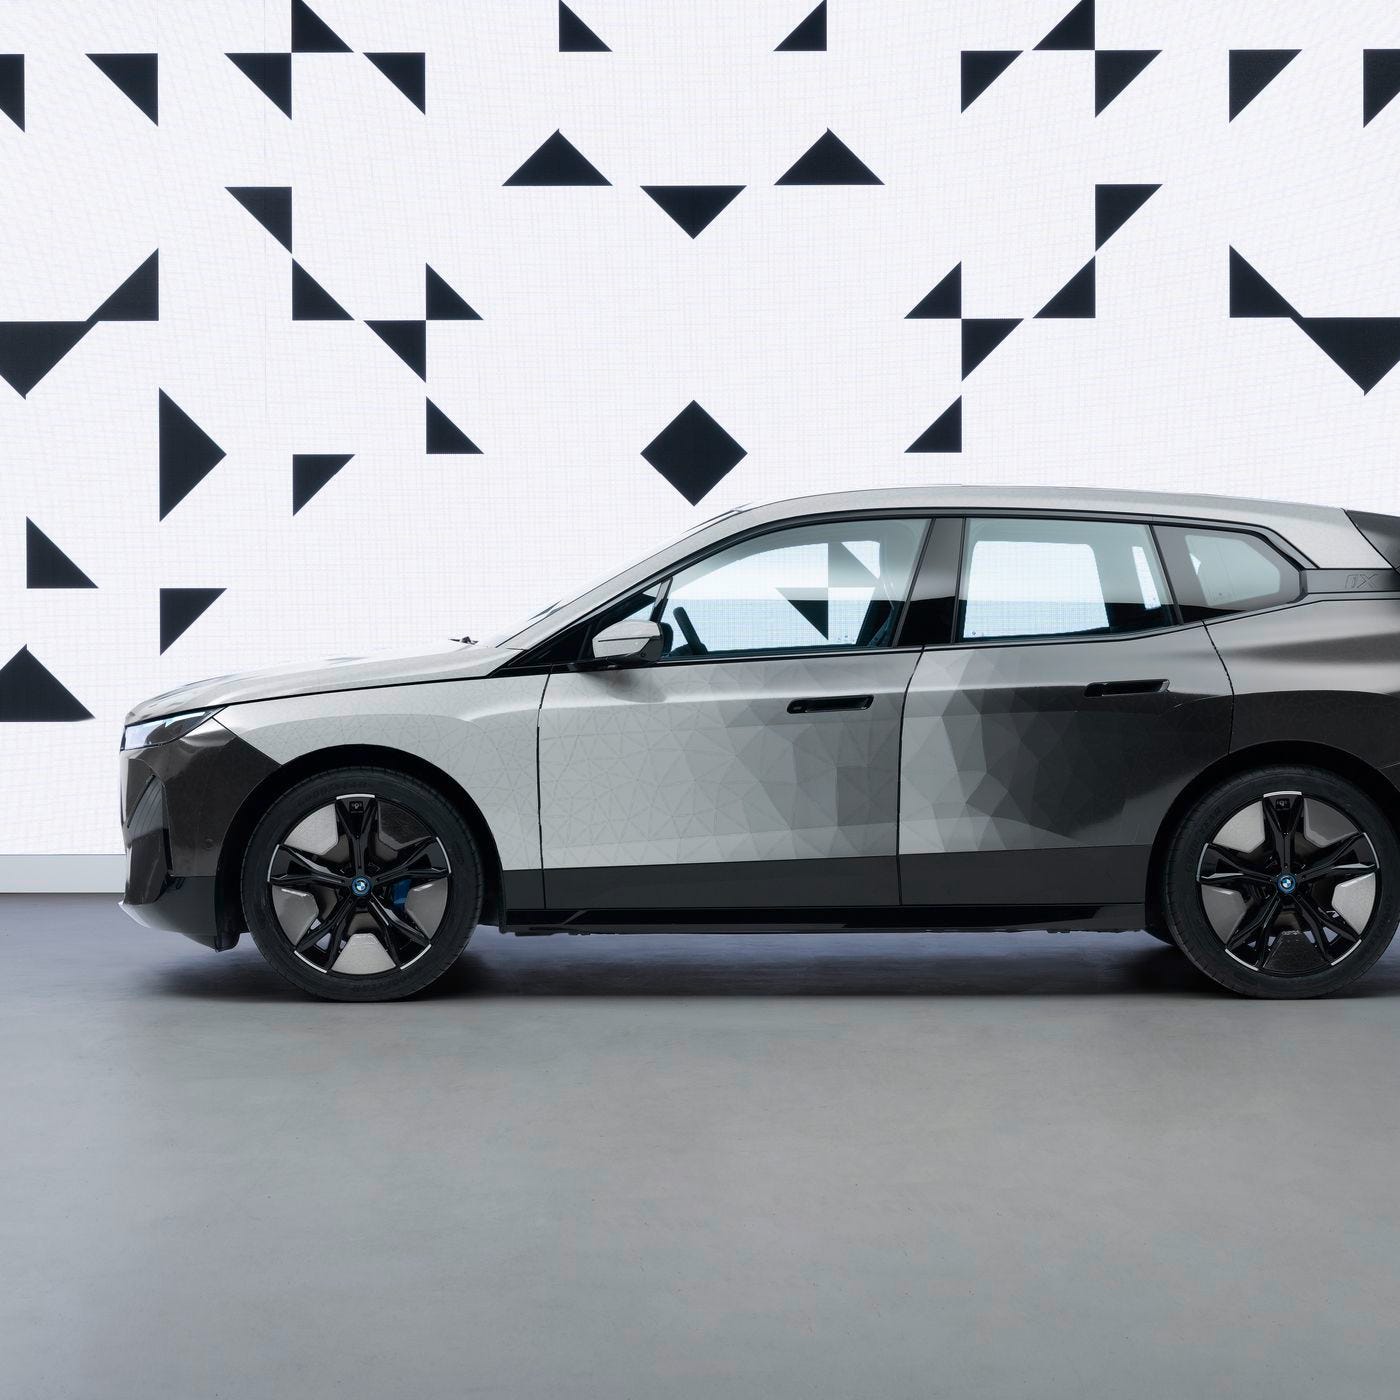 BMW debuts its new color-changing paint technology at CES: E Ink - The Verge